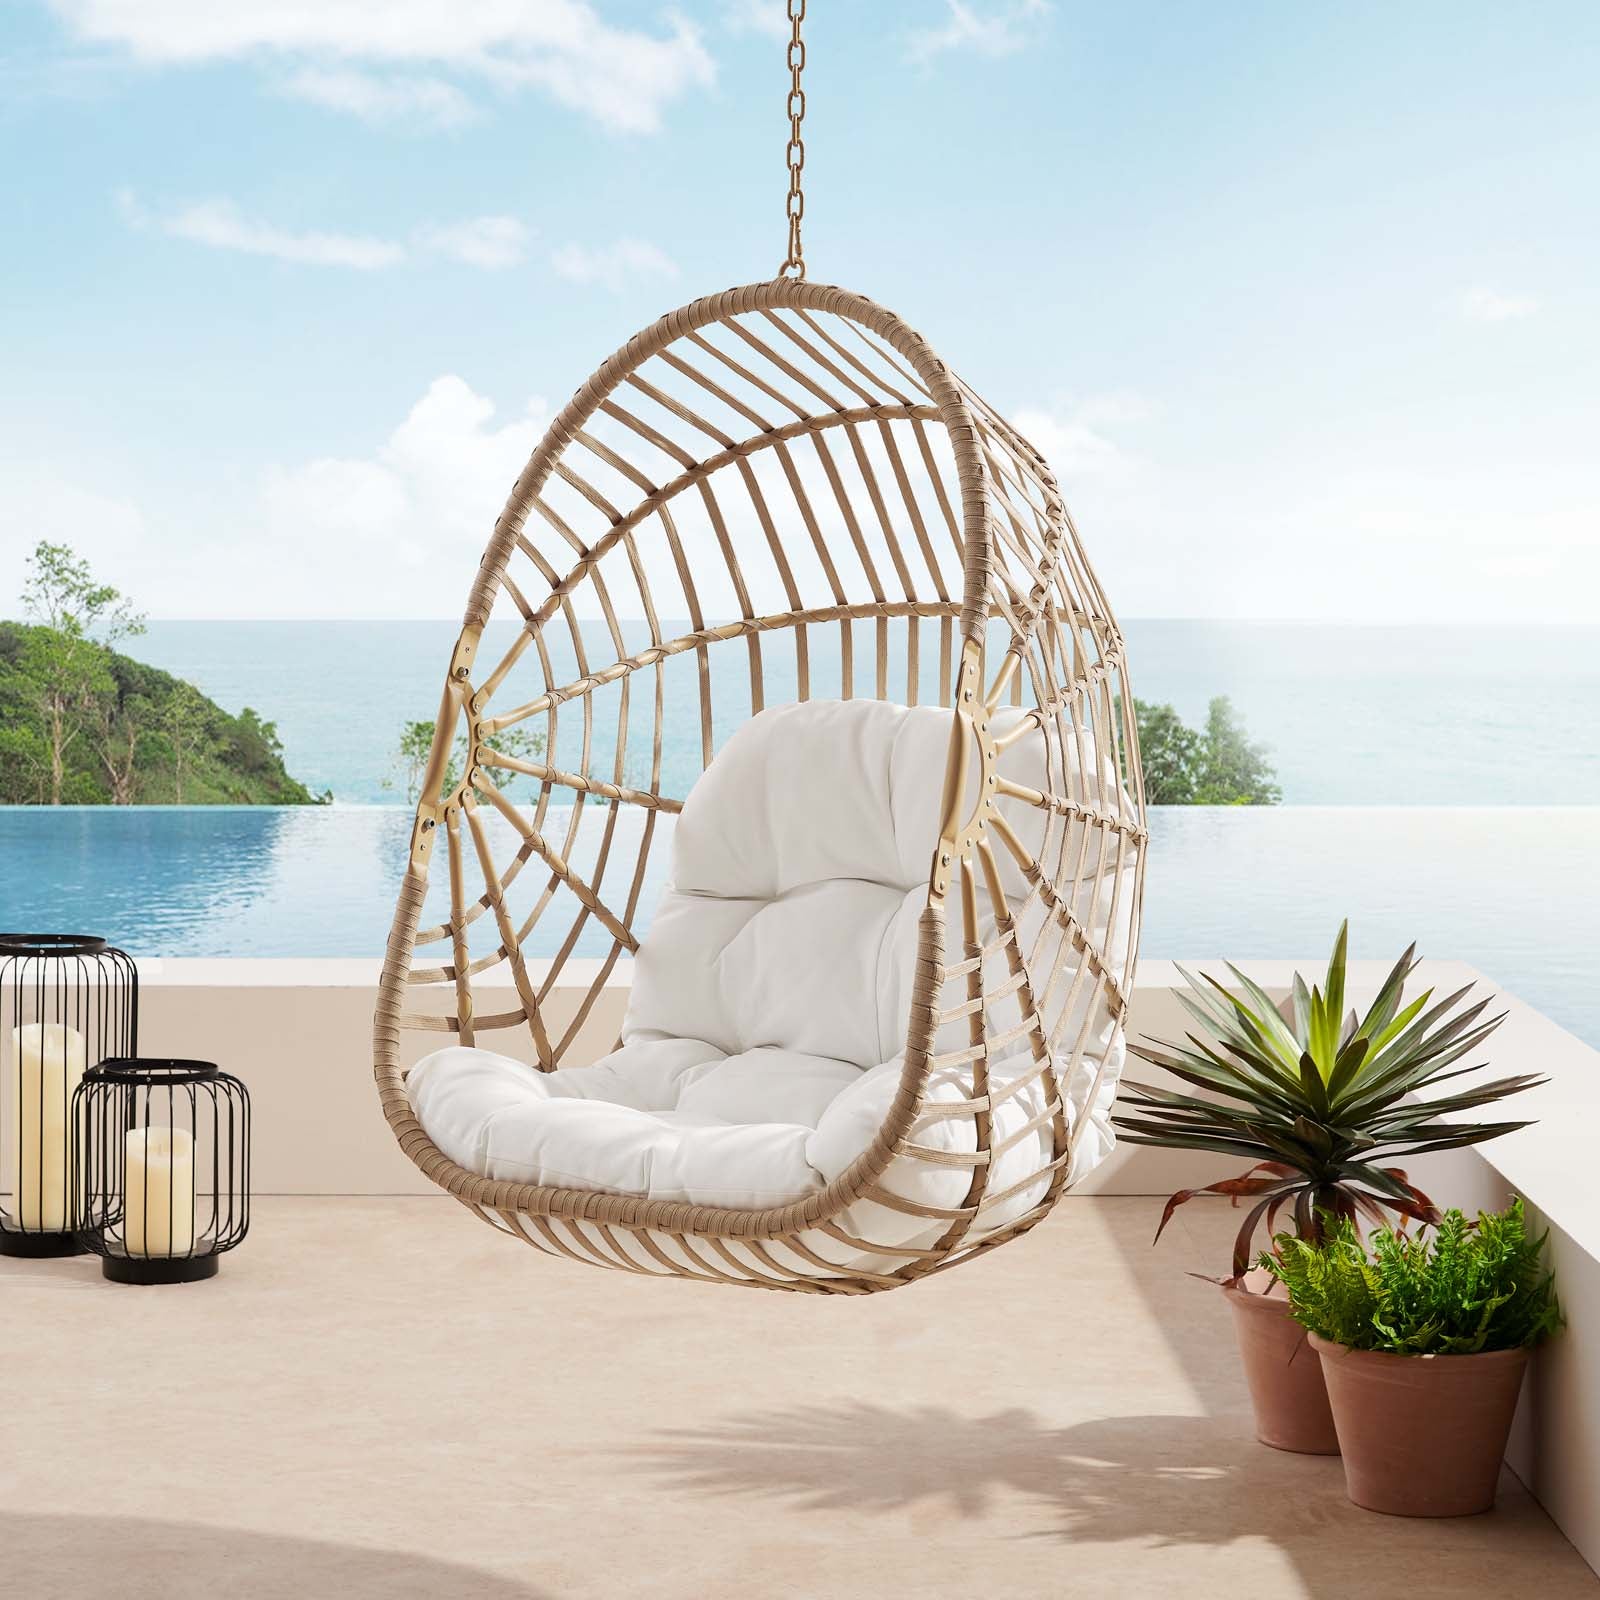 abate outdoor patio swing chair with stand